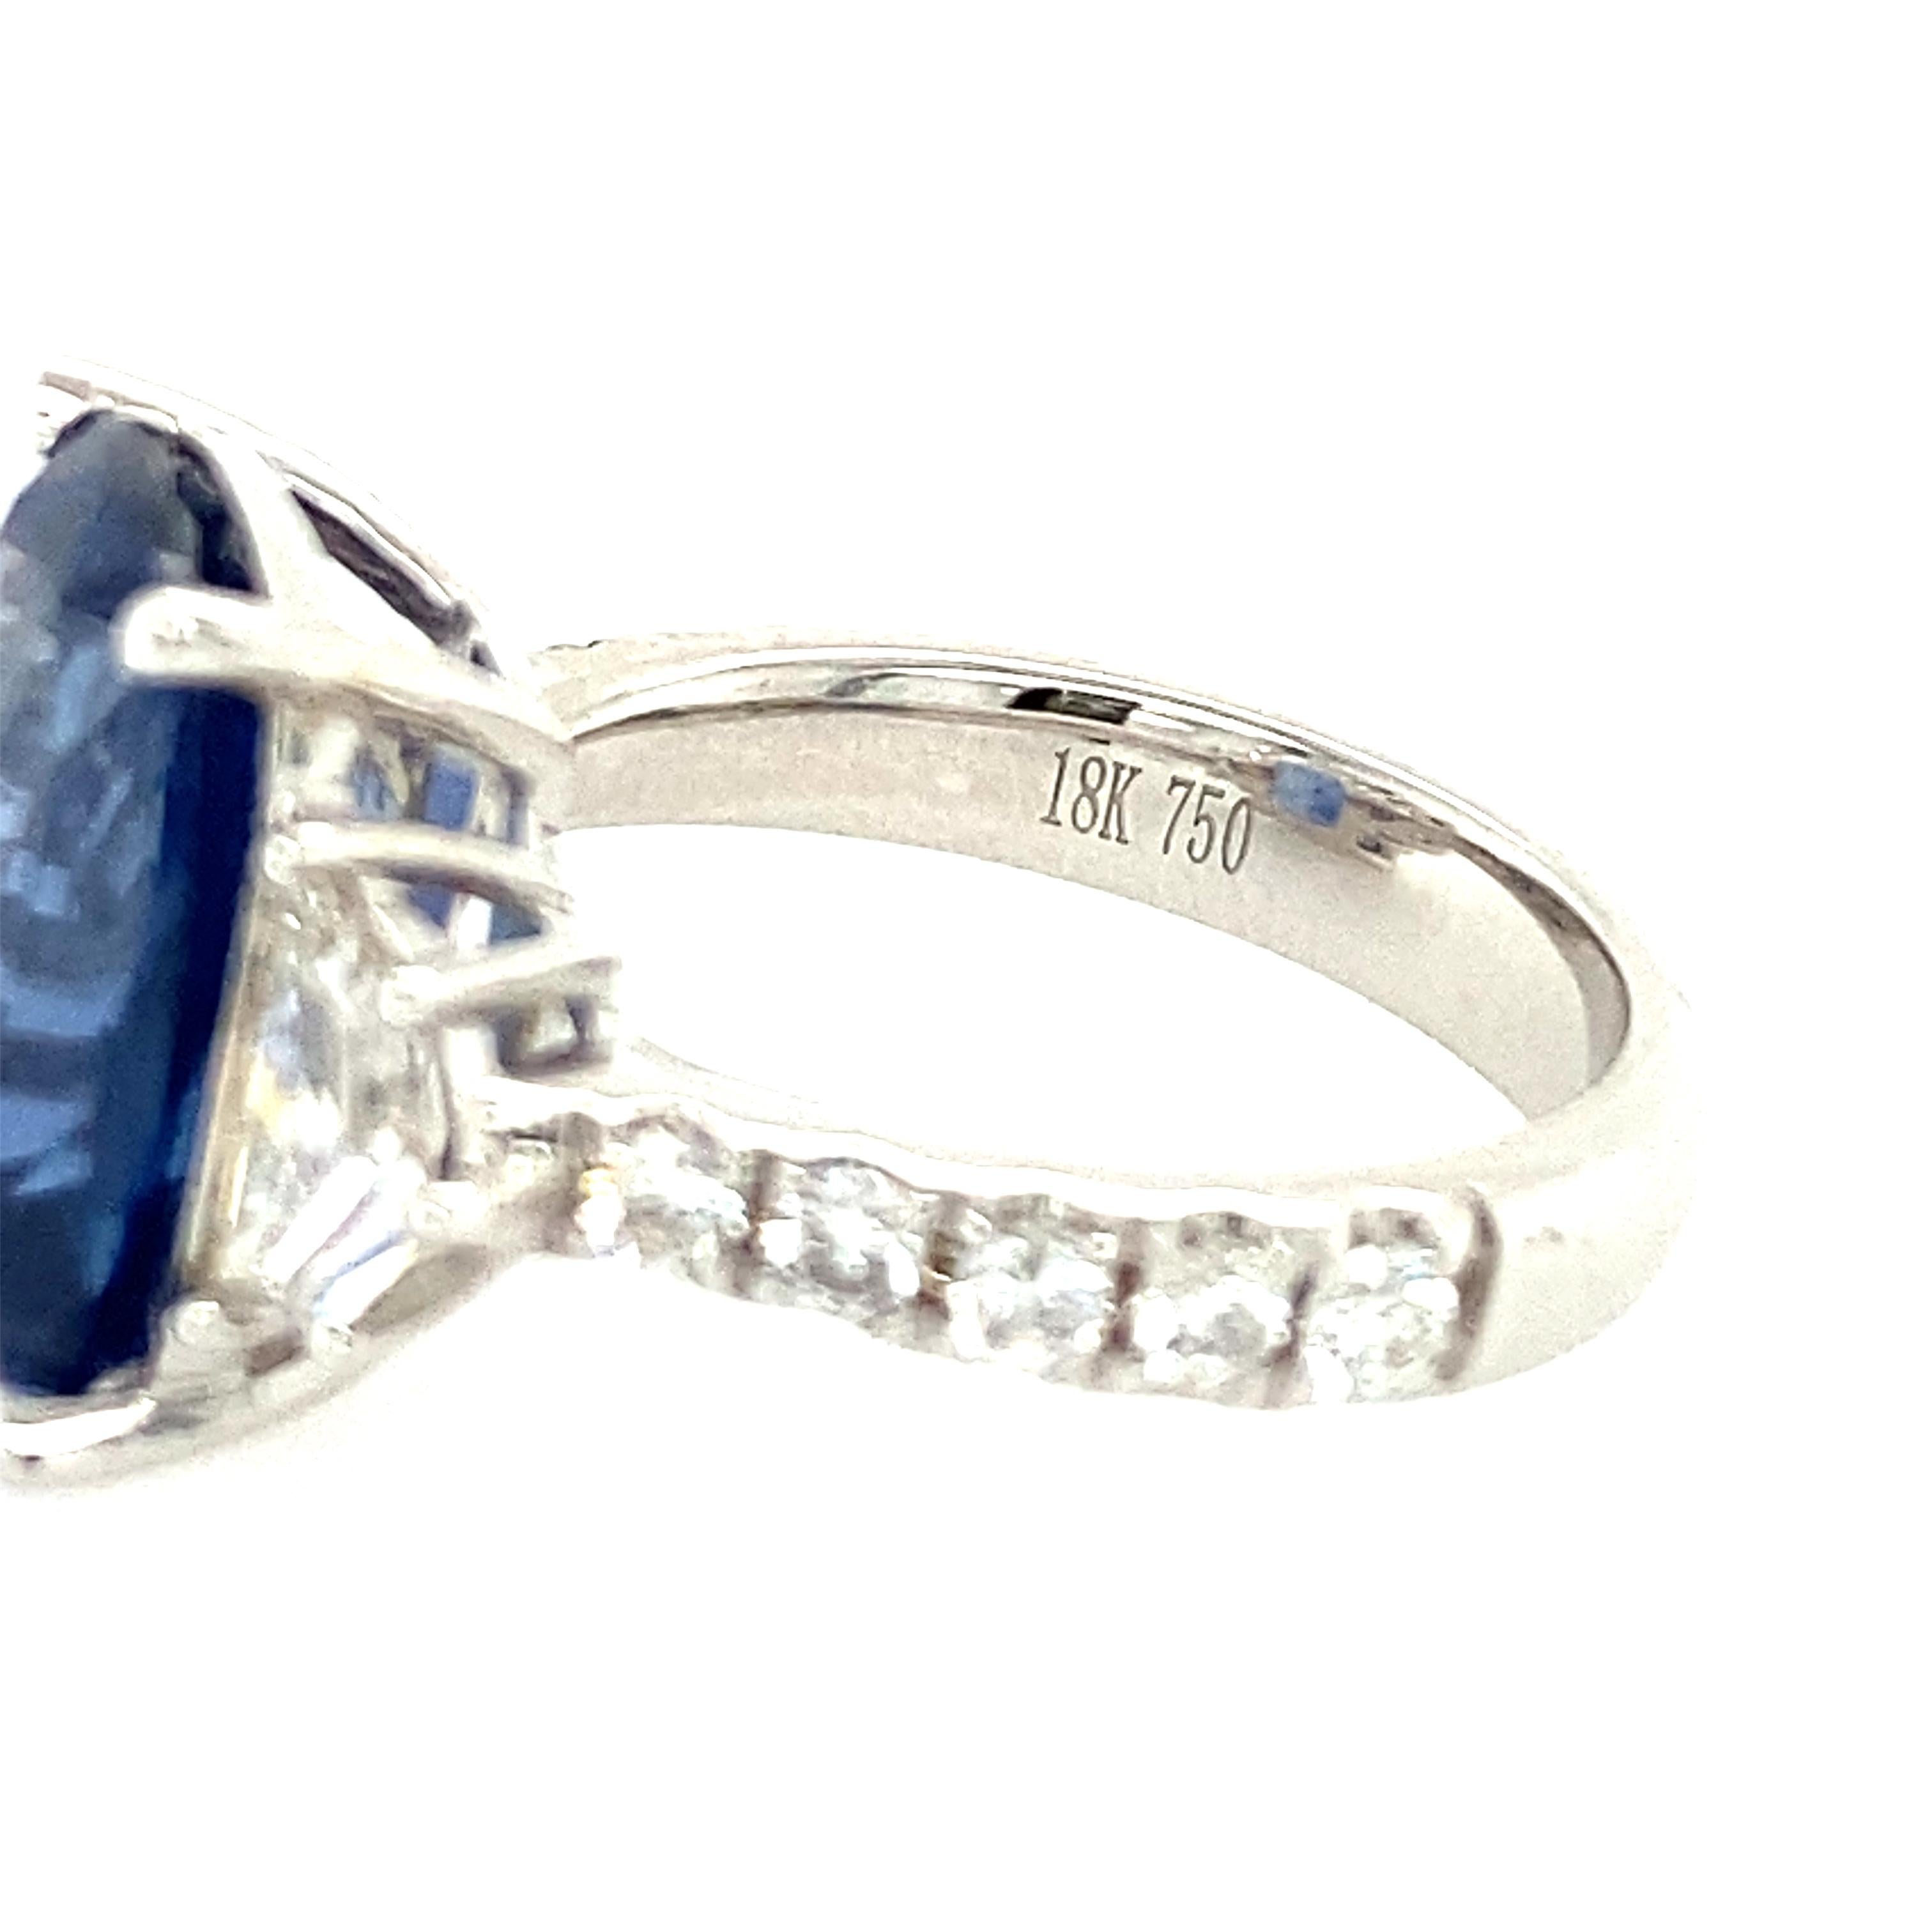 Cushion Cut Blue Sapphire and Diamond Ring in 18K White Gold